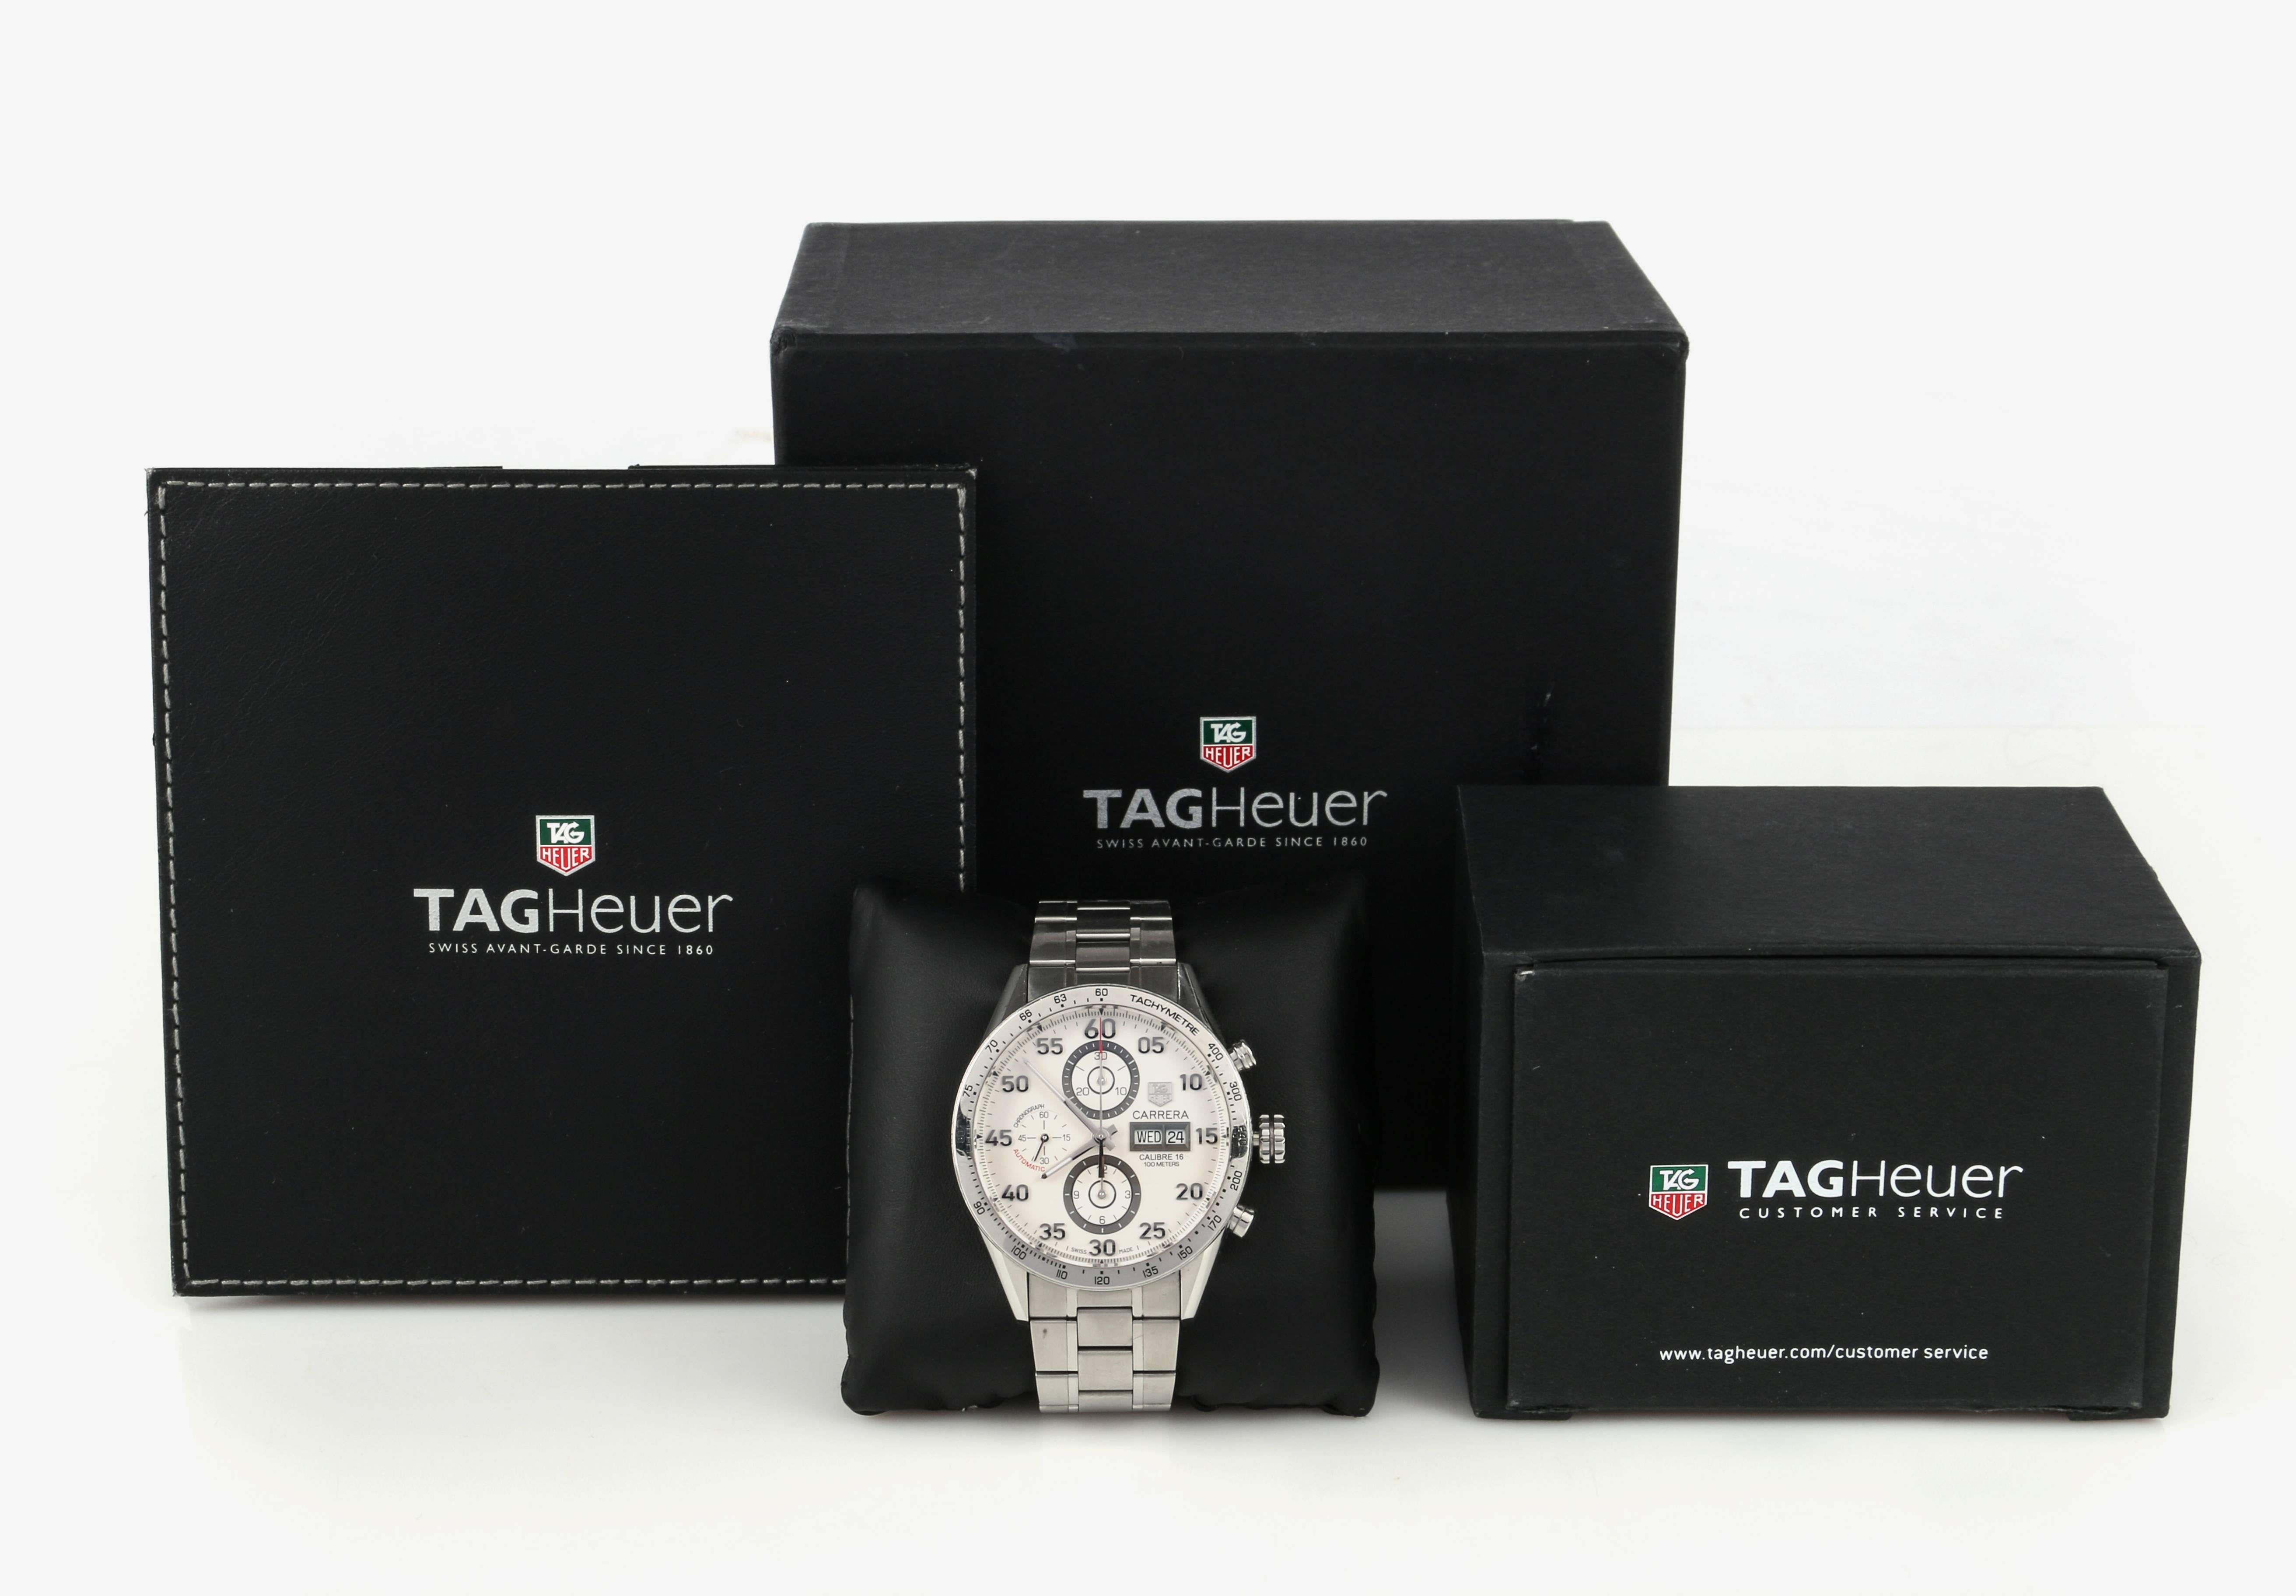 Tag Heuer Carrera Calibre 16 Automatic Chronograph 43 mm Stainless Steel watch. White dial features 3 sub dials, a day-date date window, and hour, minute and second hands. Dial is marked “Tag Heuer", "Carrera", "Calibre